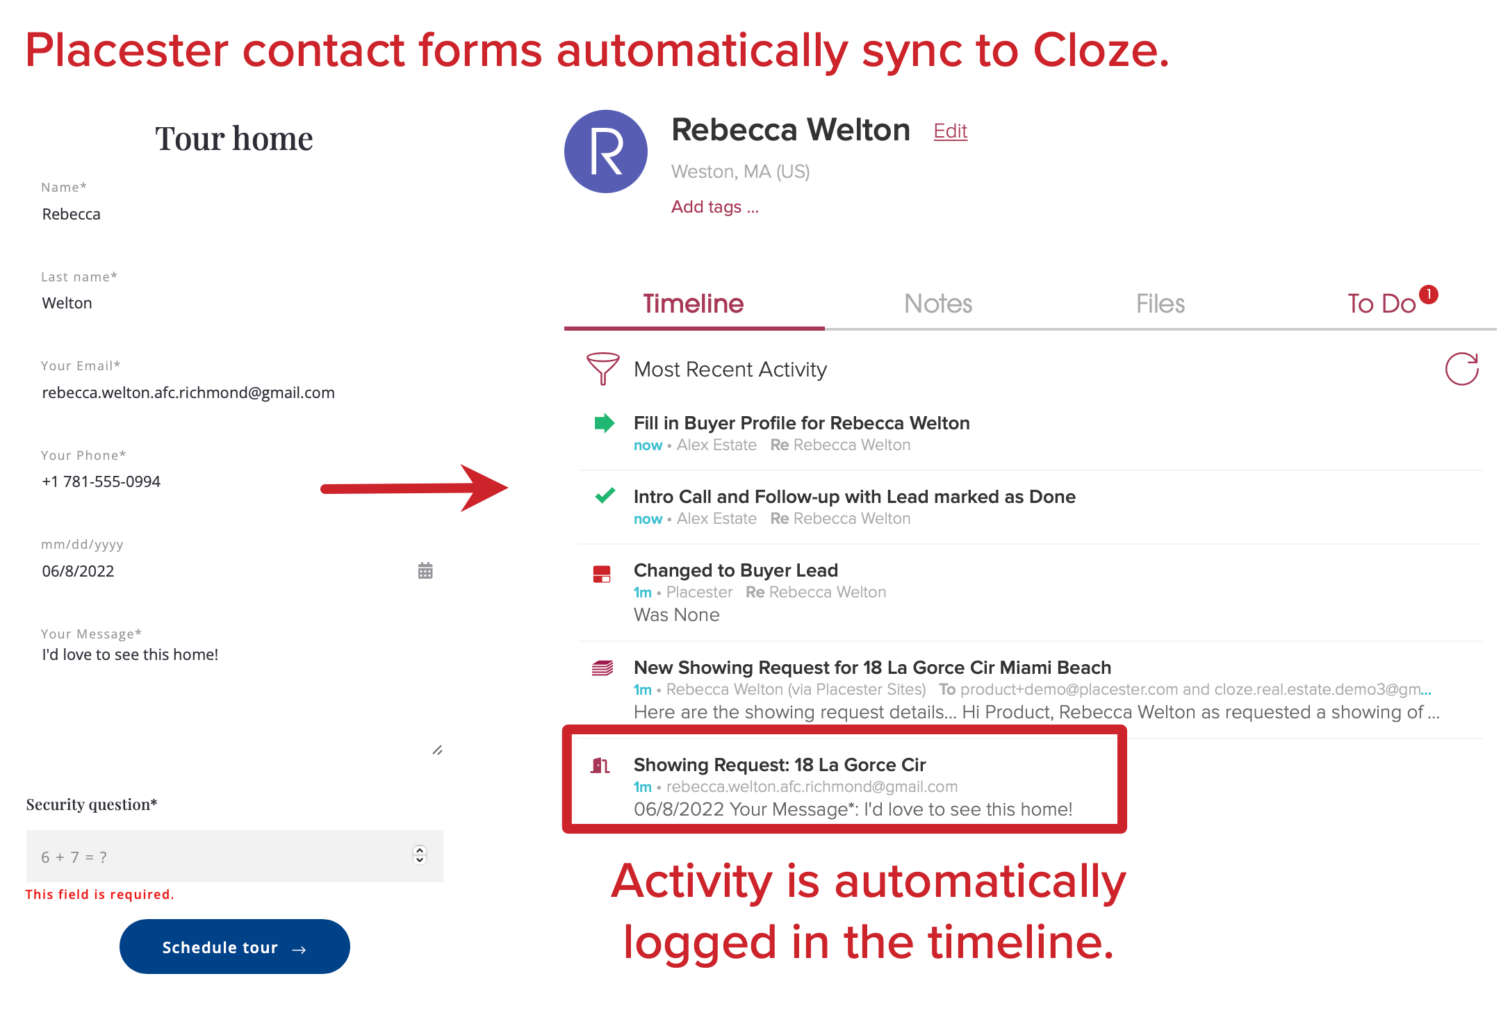 Placester contact forms automatically sync to Cloze.